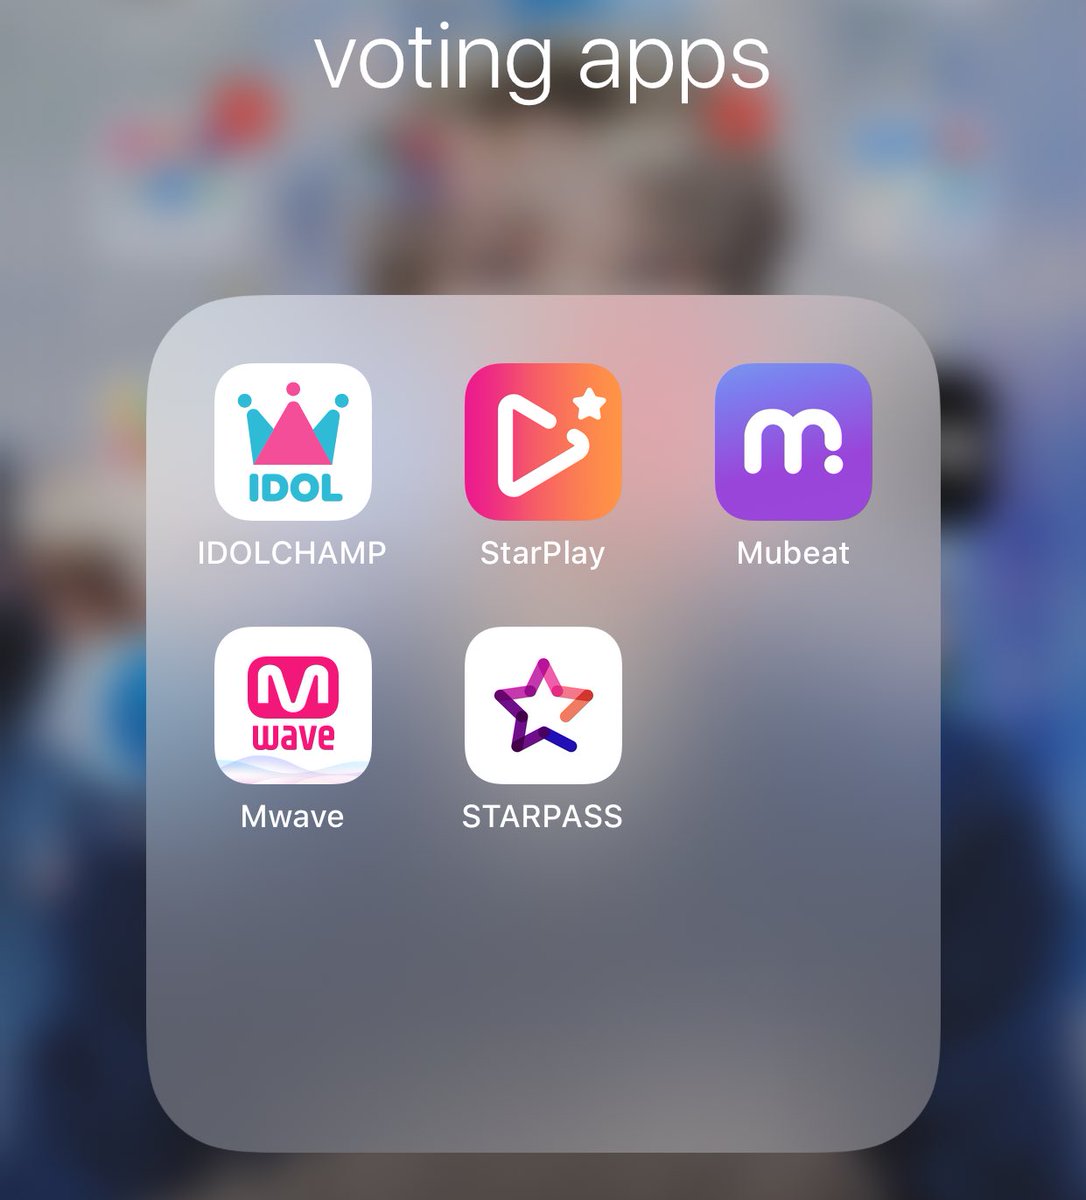 here are the apps to download!